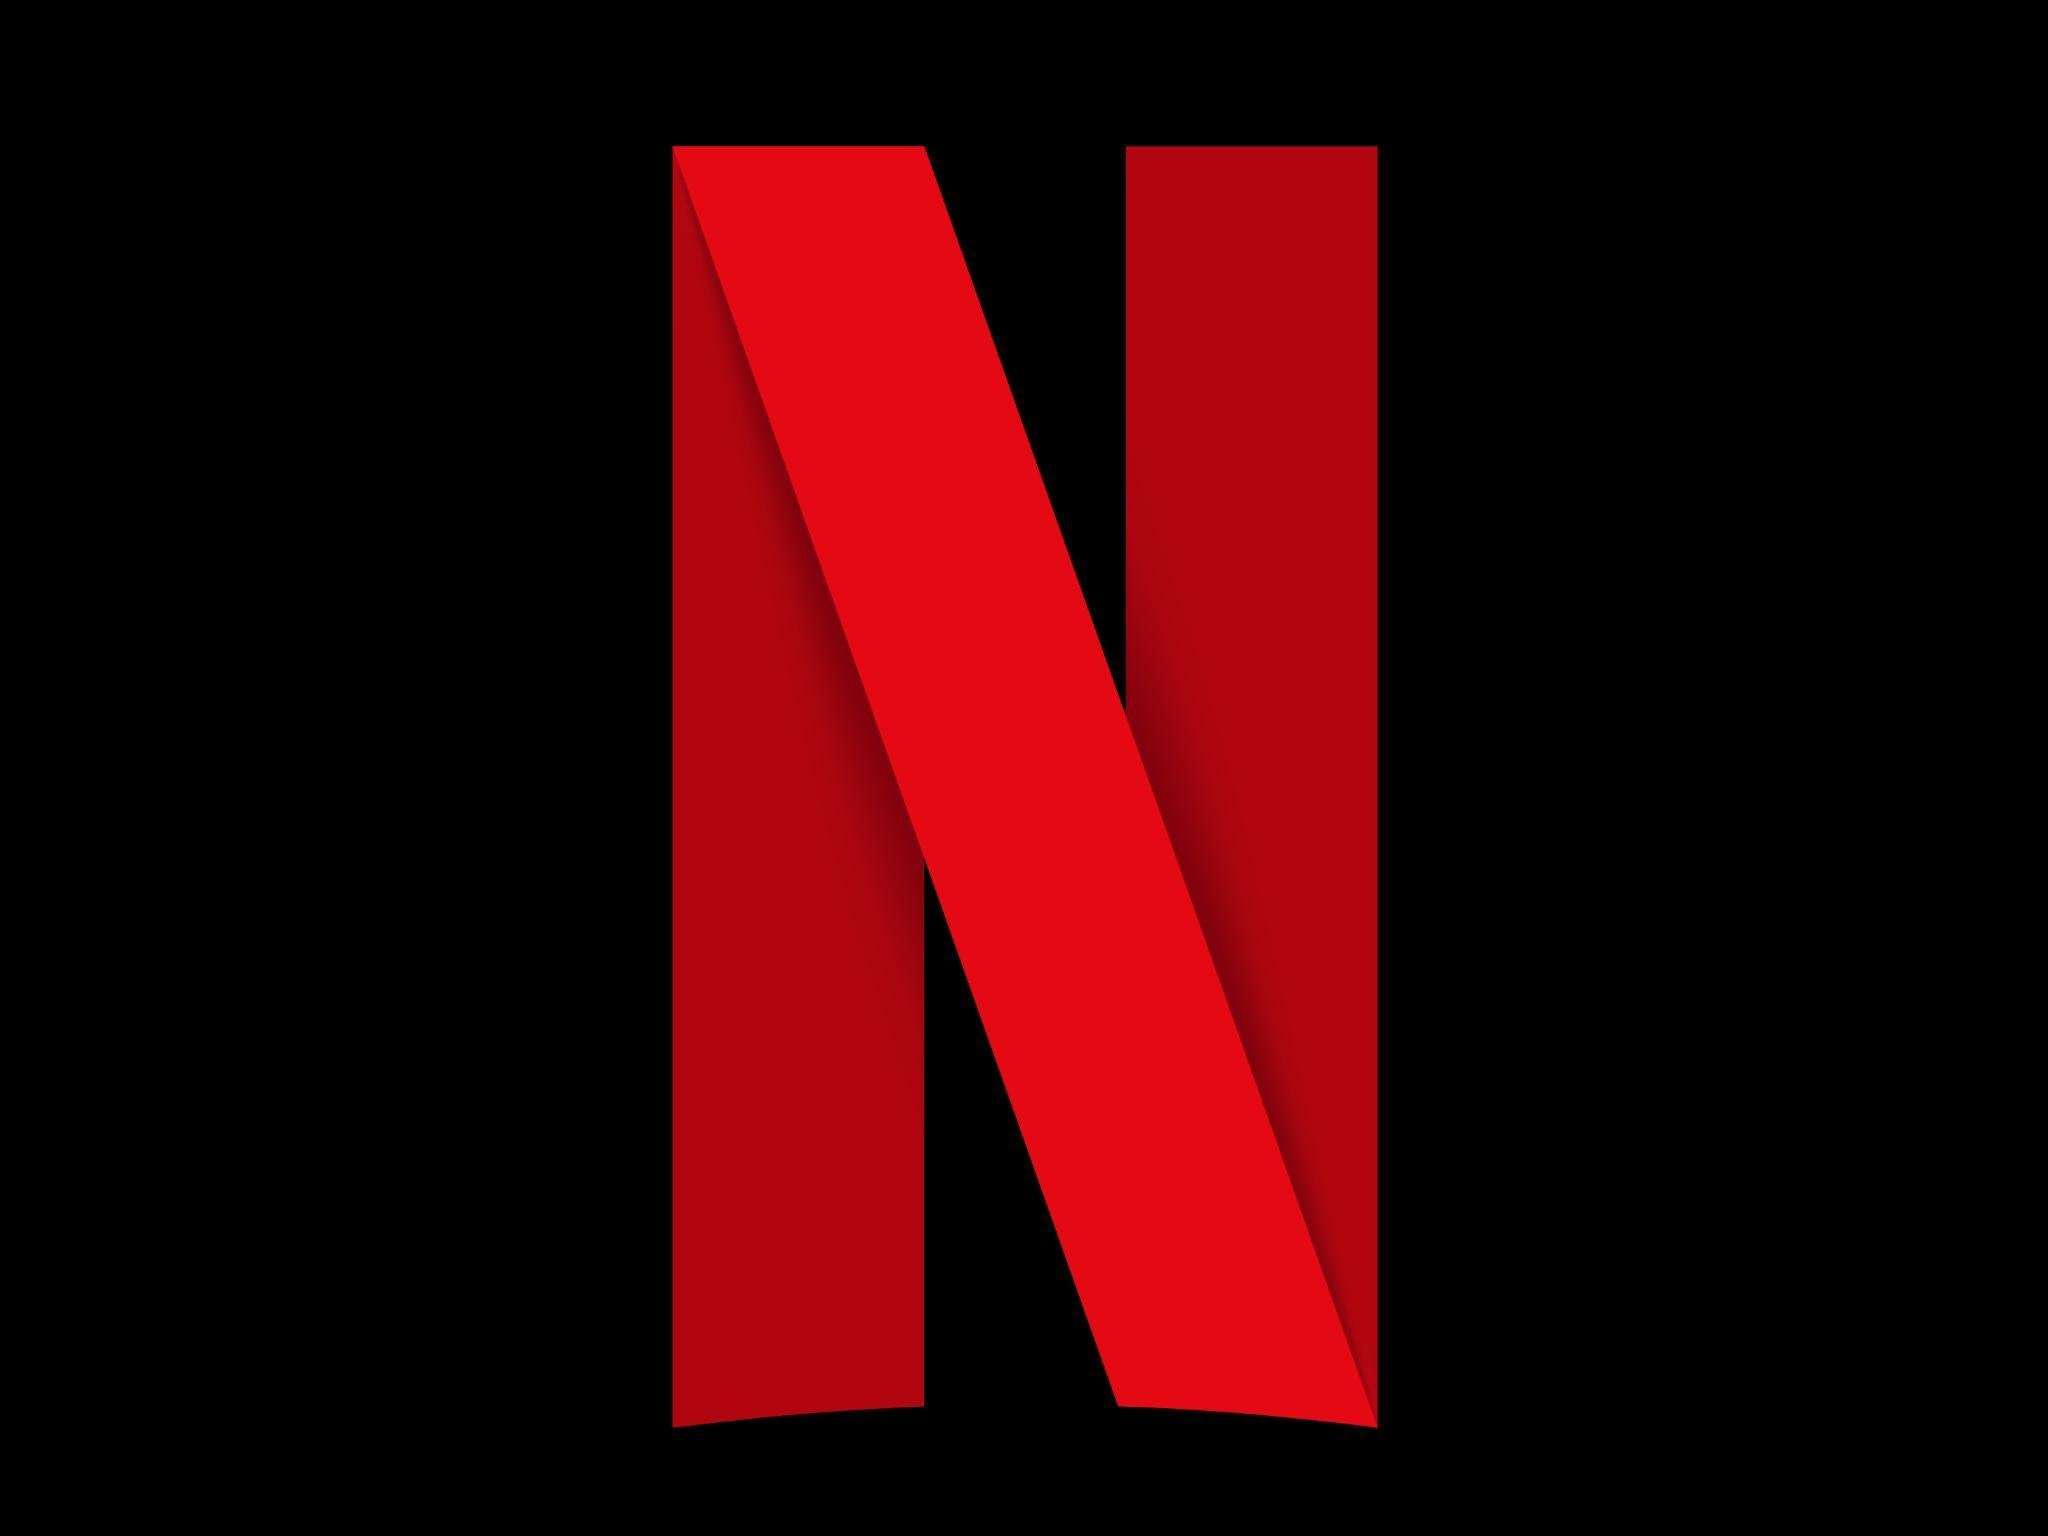 image for Netflix's biggest competition is sleep, says CEO Reed Hastings